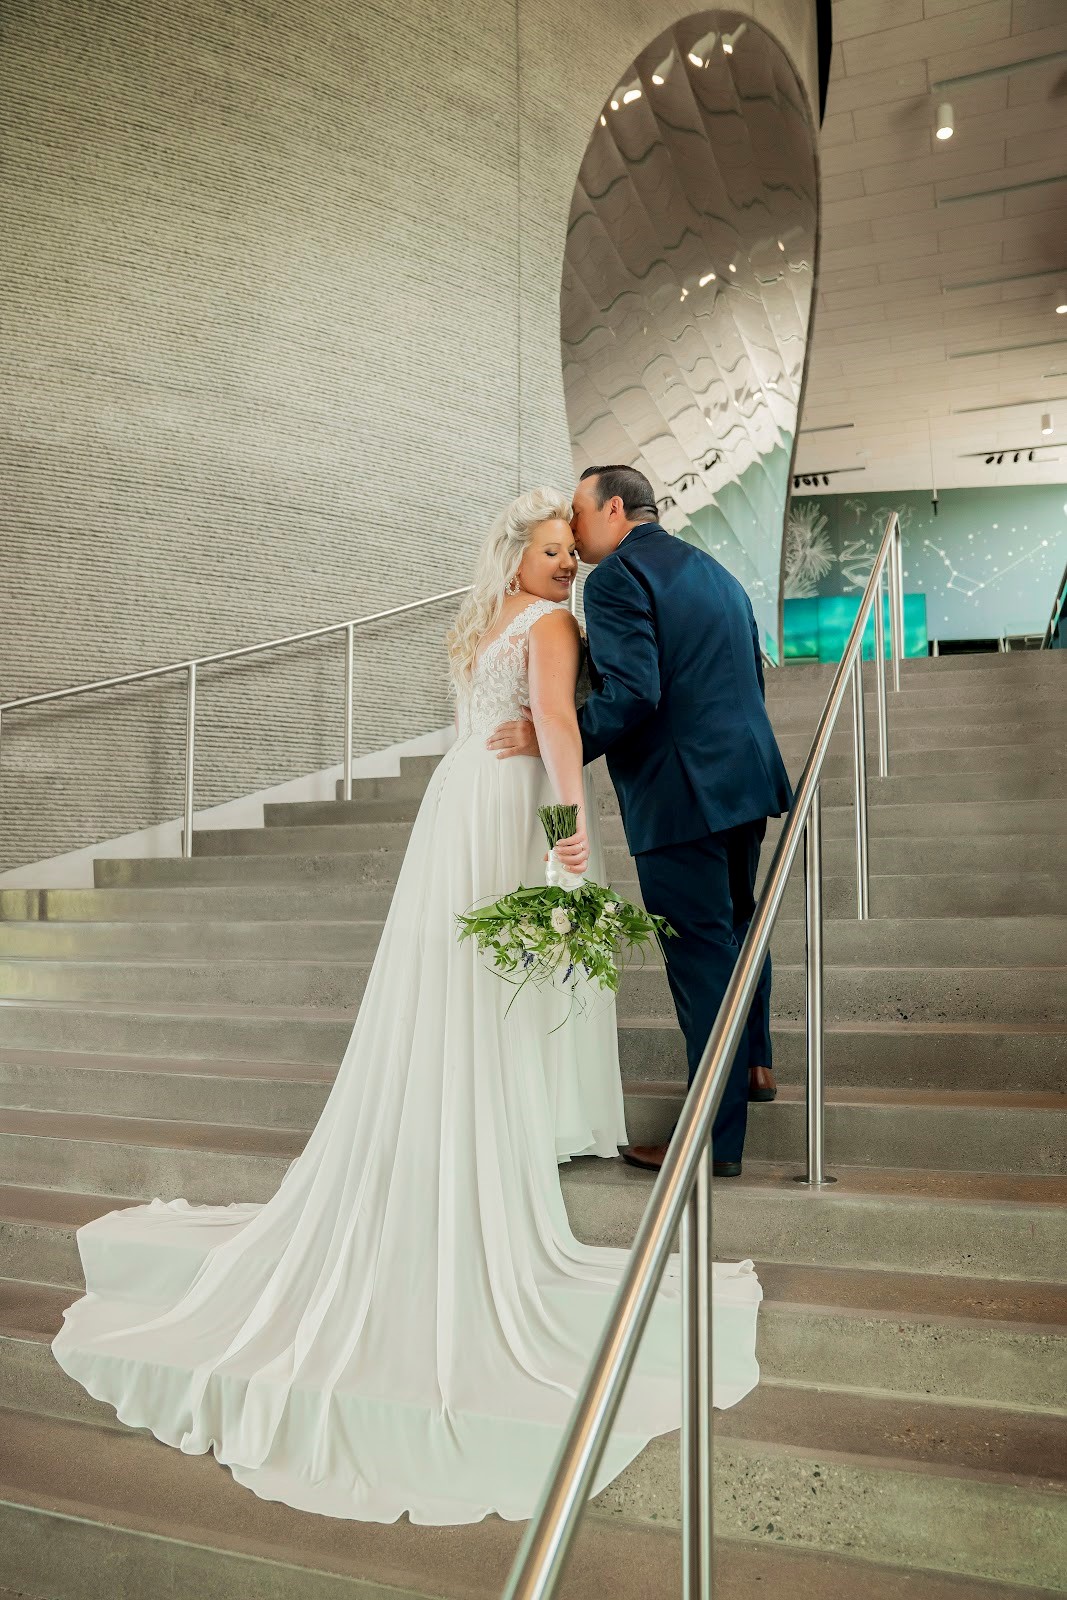 Newlyweds on the staircase